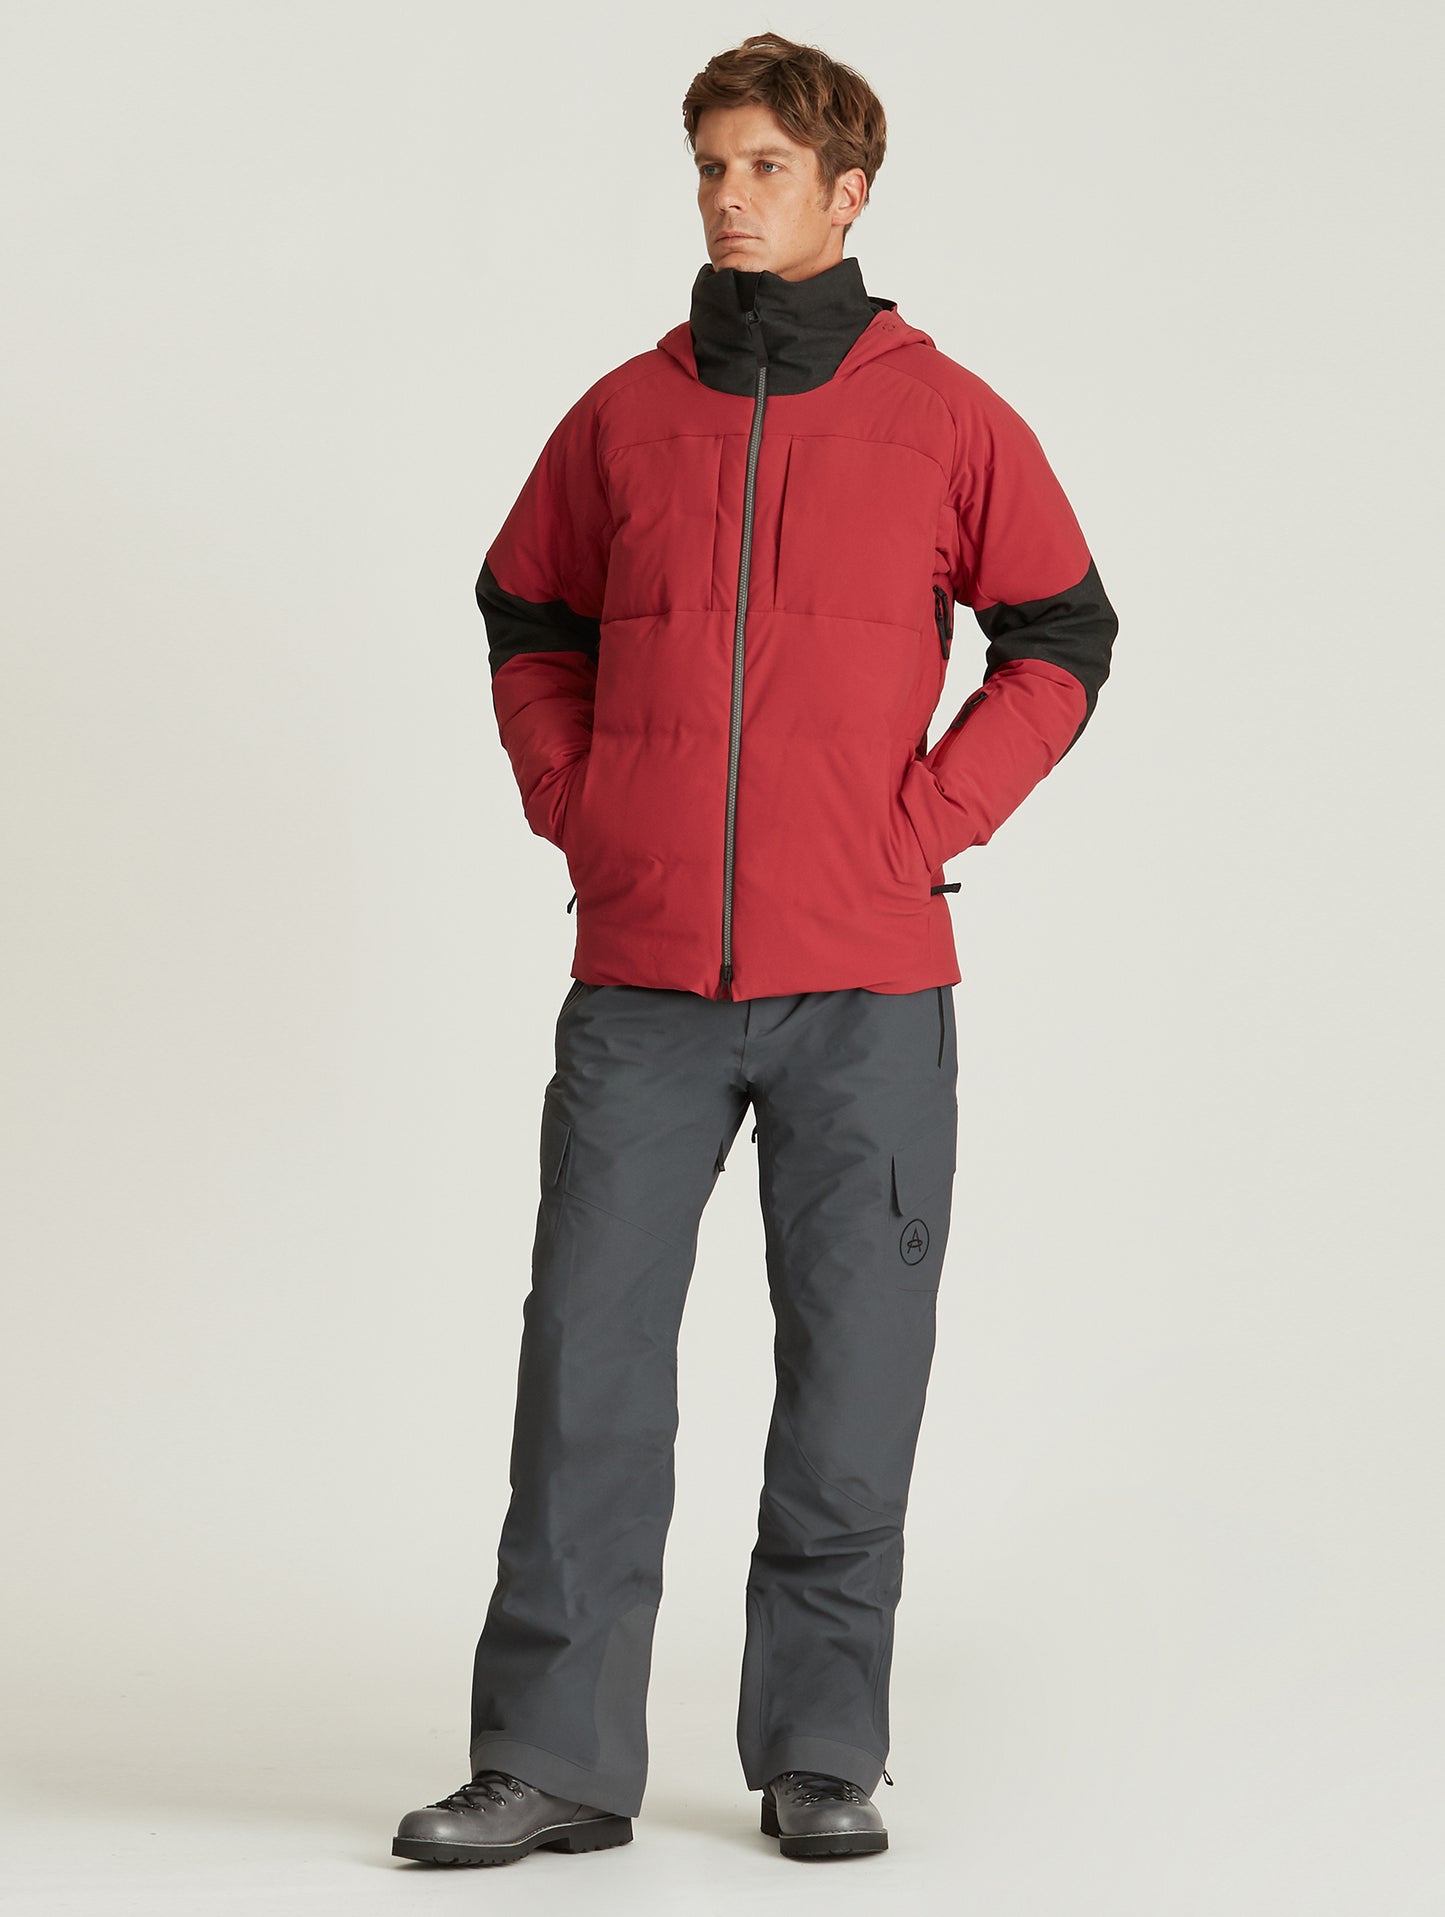 man wearing red ski jacket from Aether Apparel